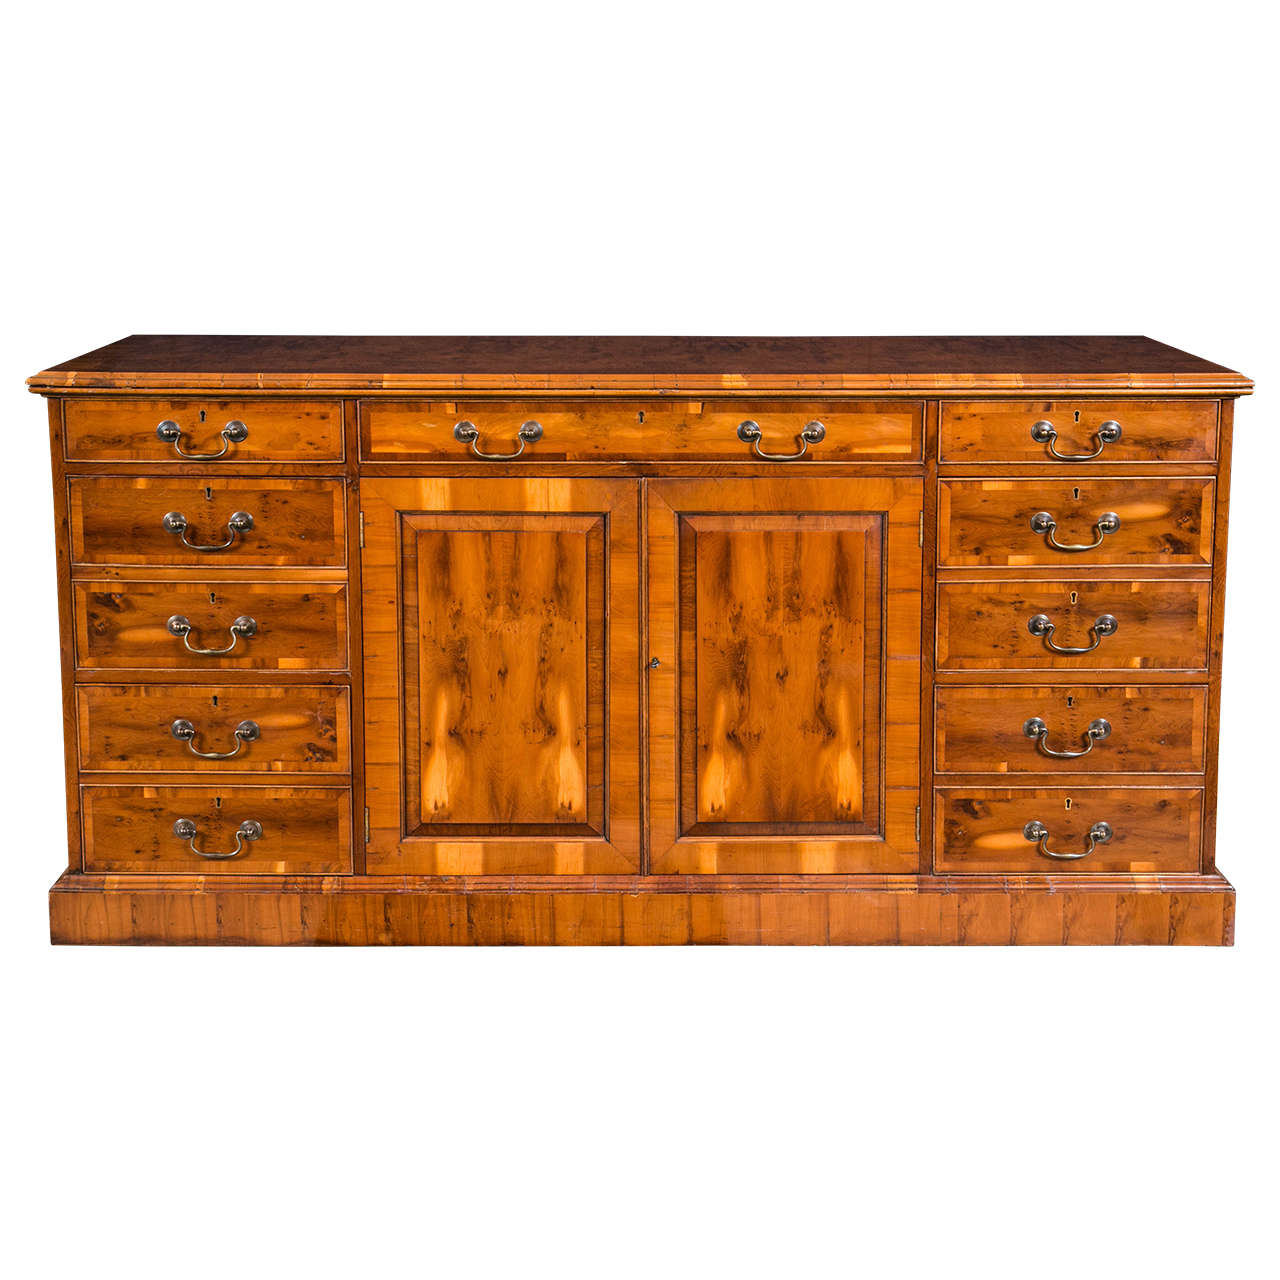 Custom English Yew Wood Credenza with File Drawers For Sale